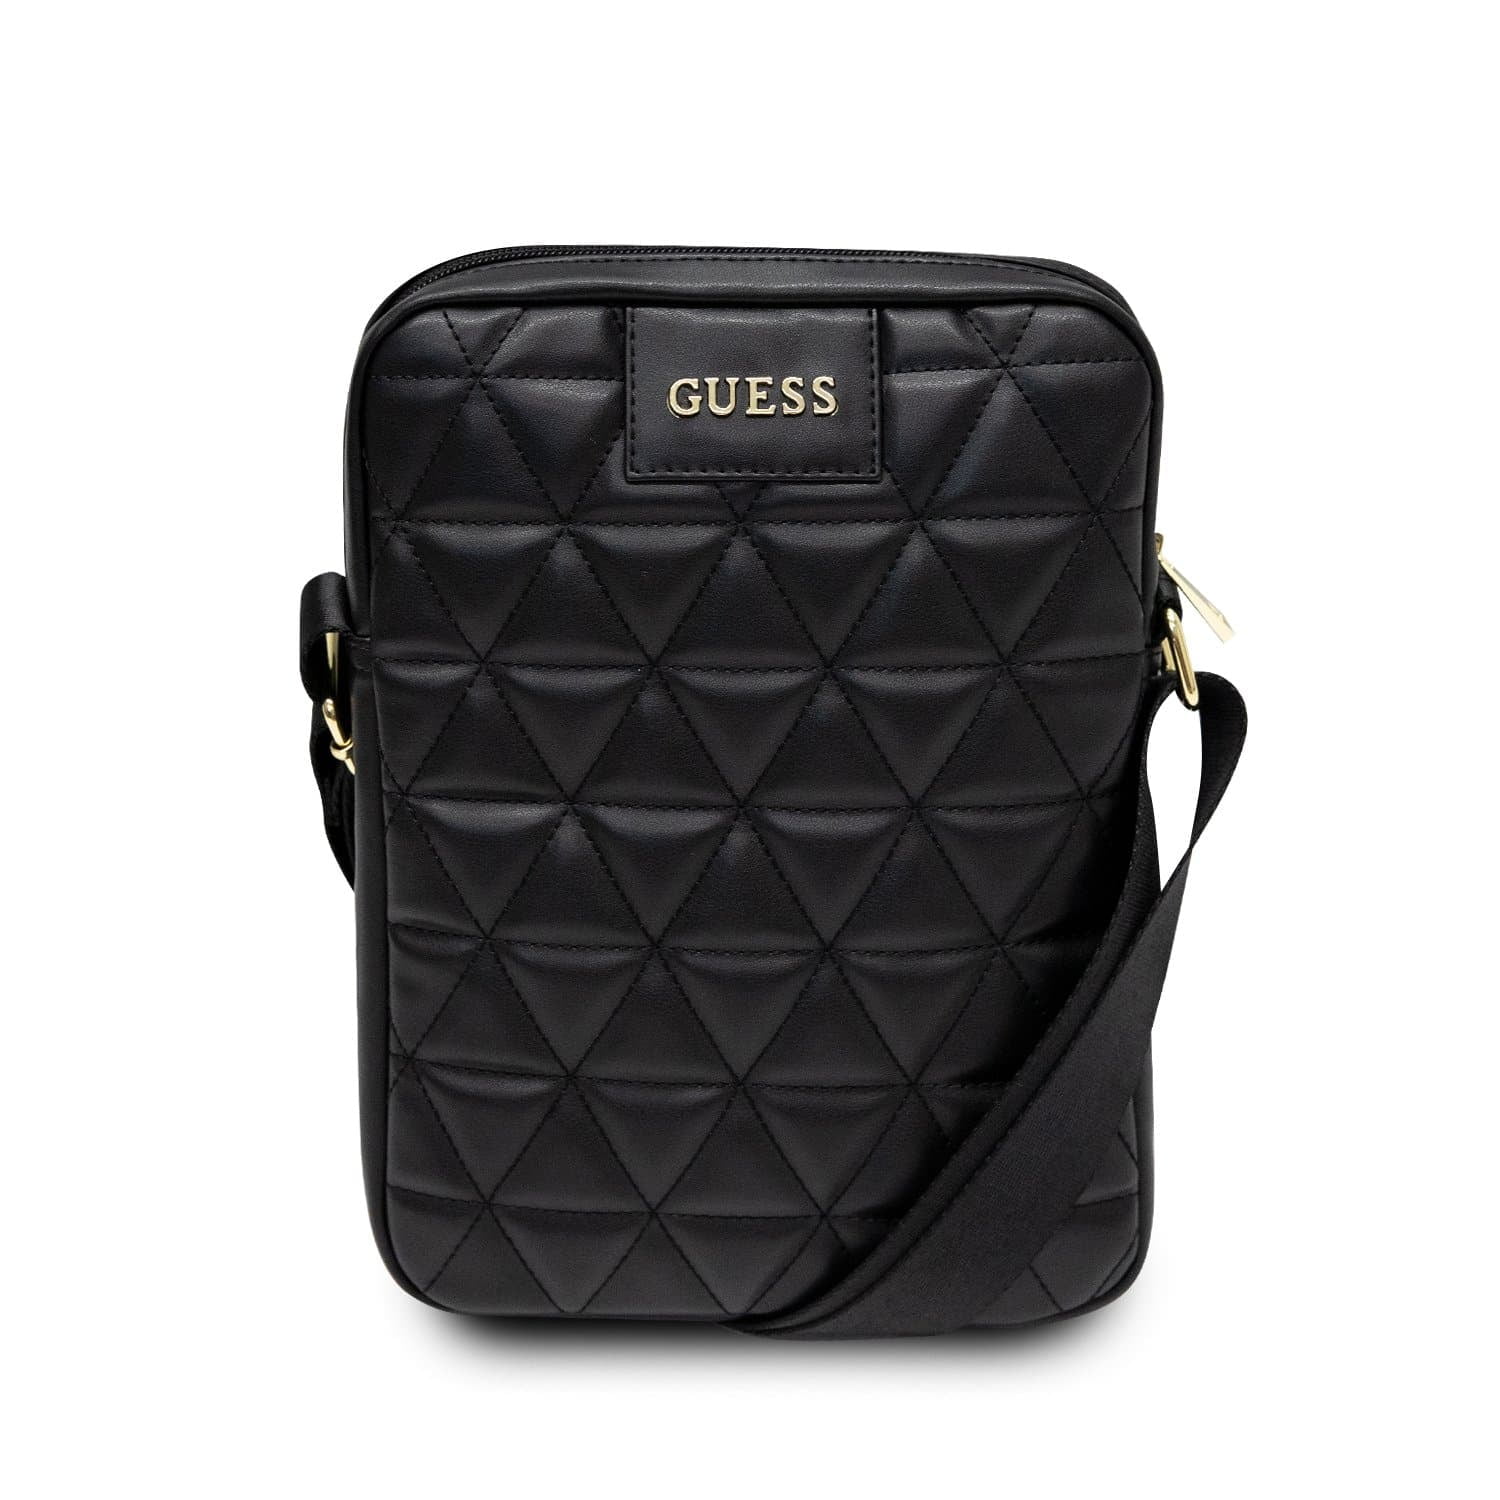 Tablet bag - PU Leather Black Quilted - Guess Walmart.com